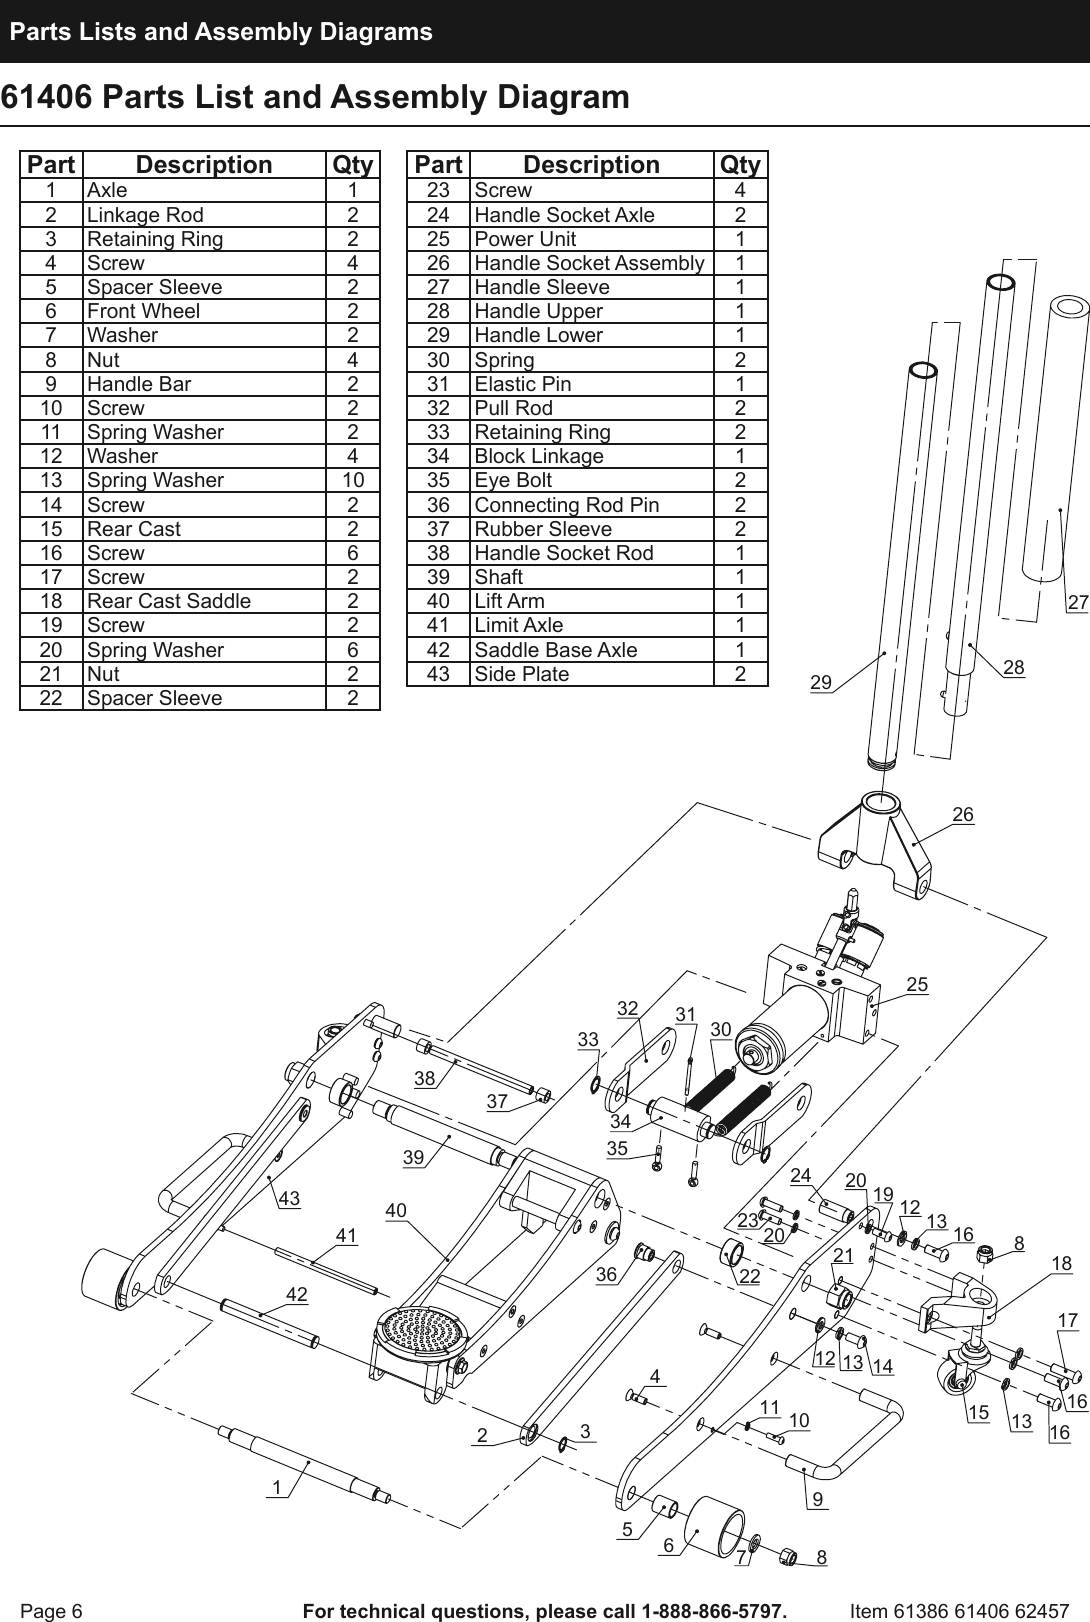 Page 6 of 8 - Harbor-Freight Harbor-Freight-2-Ton-Aluminum-Racing-Floor-Jack-With-Rapidpump-Product-Manual-  Harbor-freight-2-ton-aluminum-racing-floor-jack-with-rapidpump-product-manual